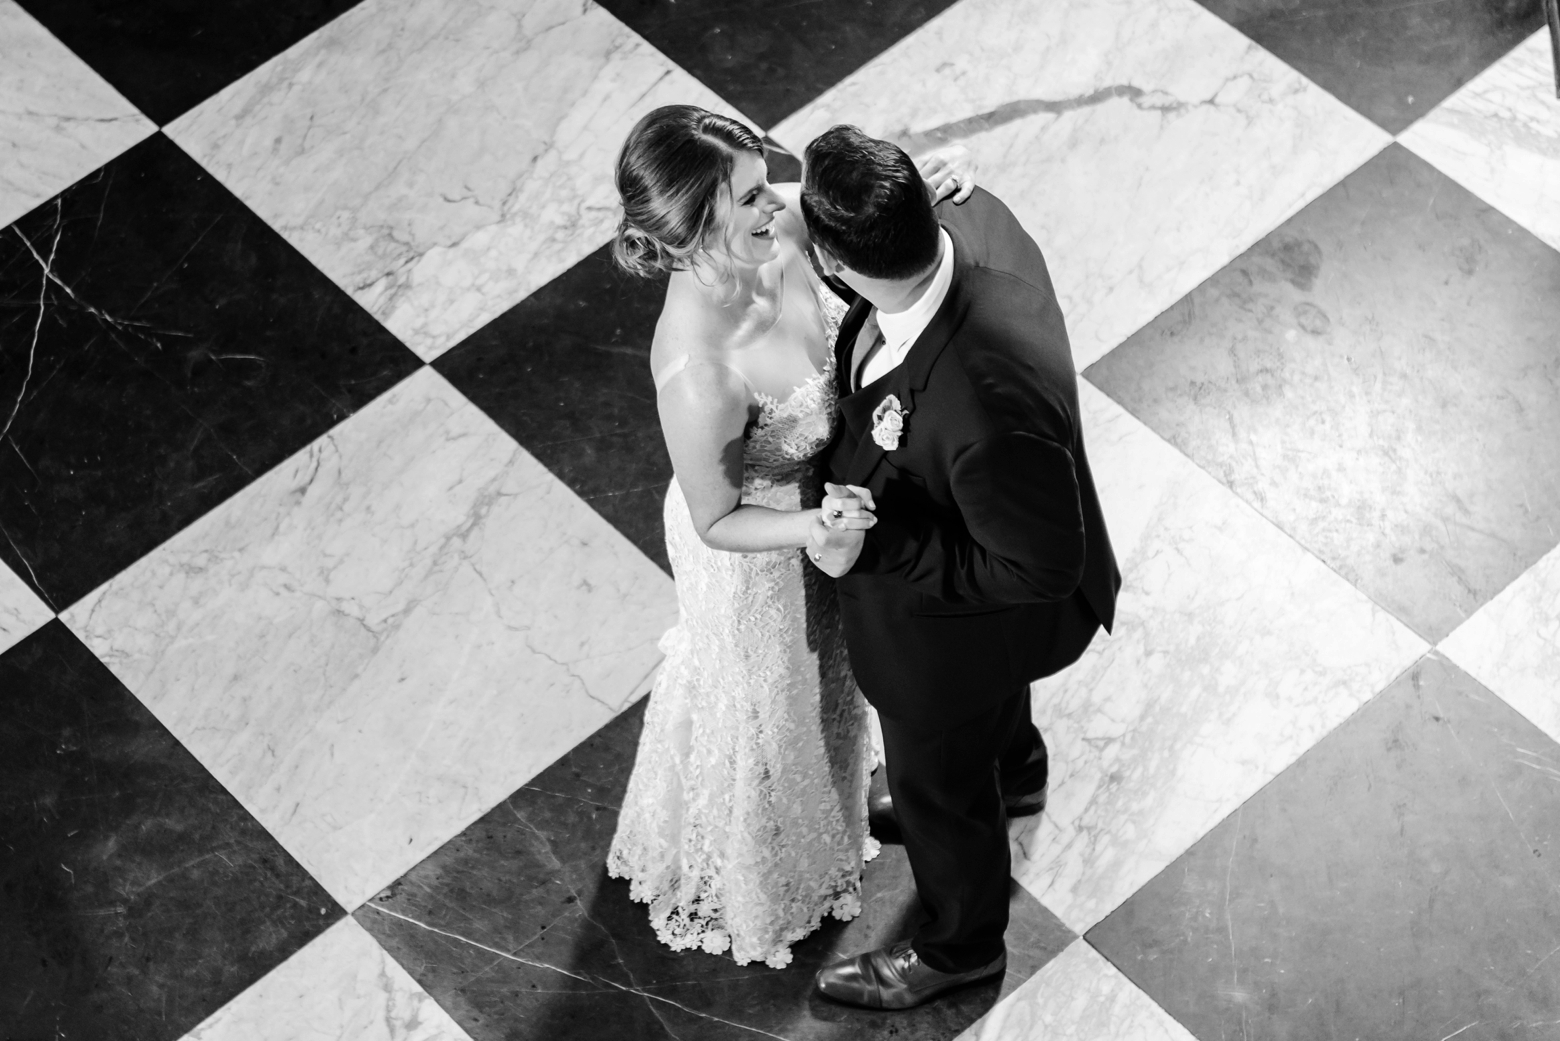 Tampa Wedding Photograph above a bride and groom dancing in the oxford exchange wedding reception's checkerboard tile floor